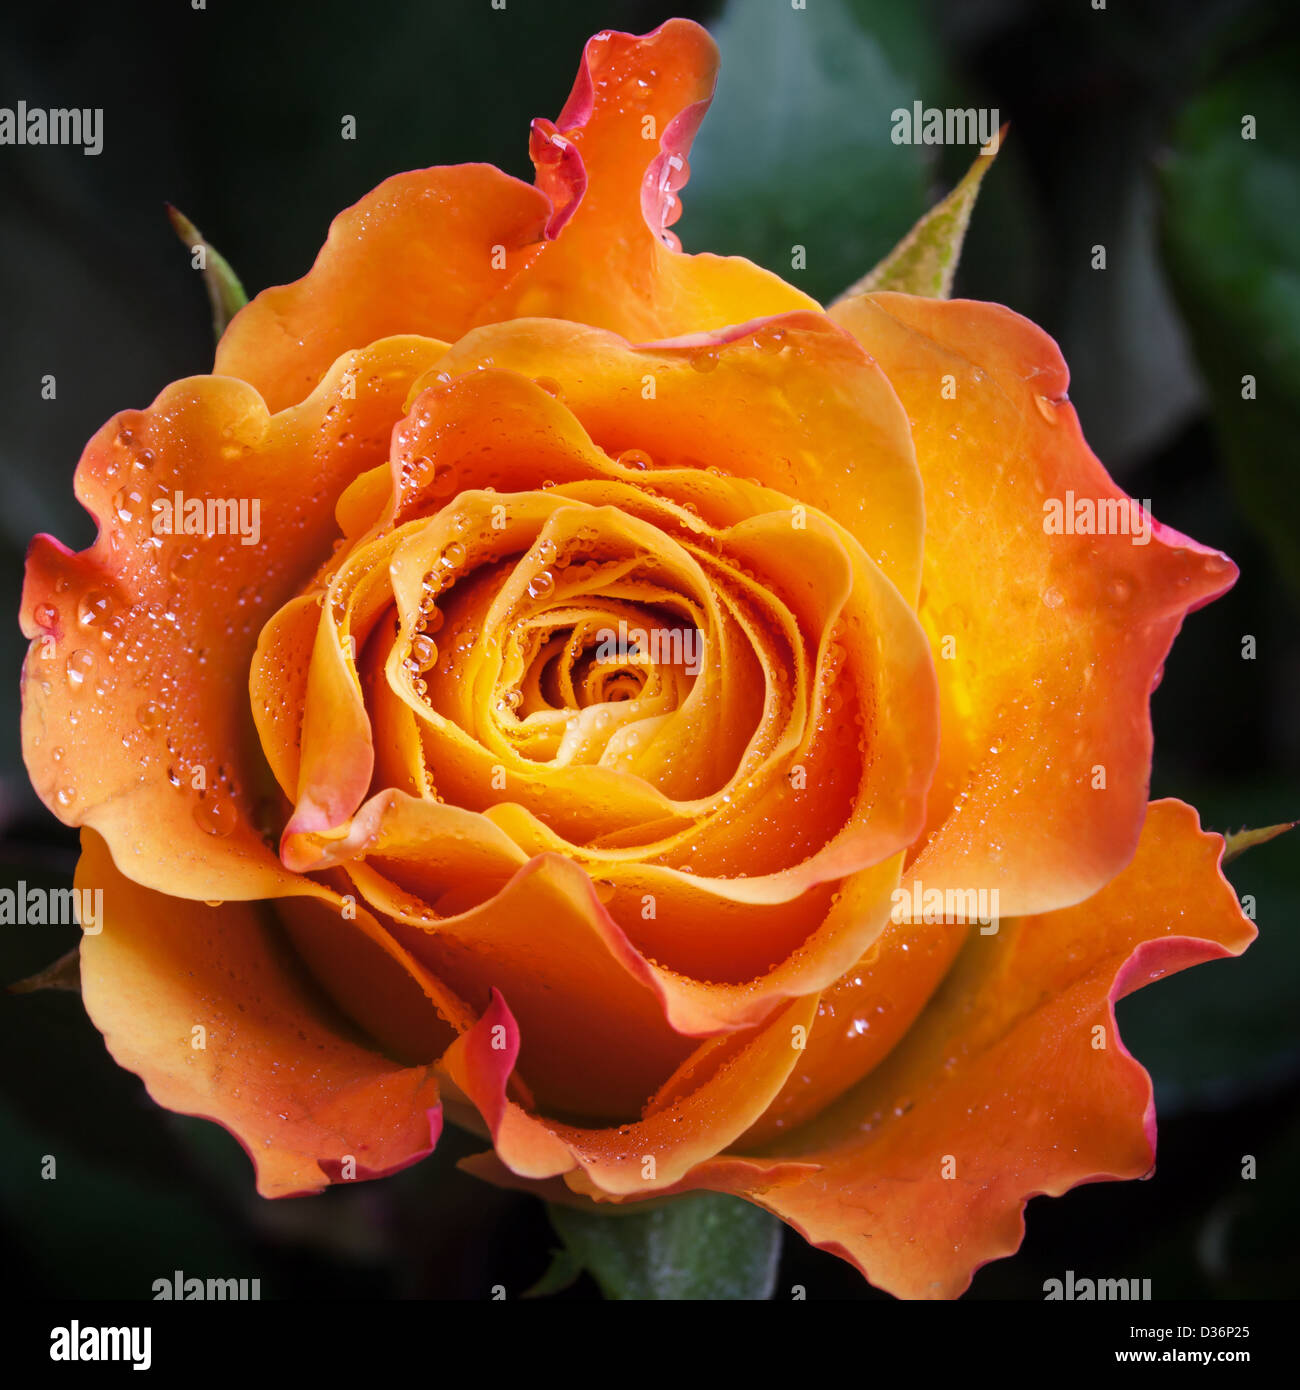 Wet orange and red rose flower close-up photo with shallow depth of field Stock Photo